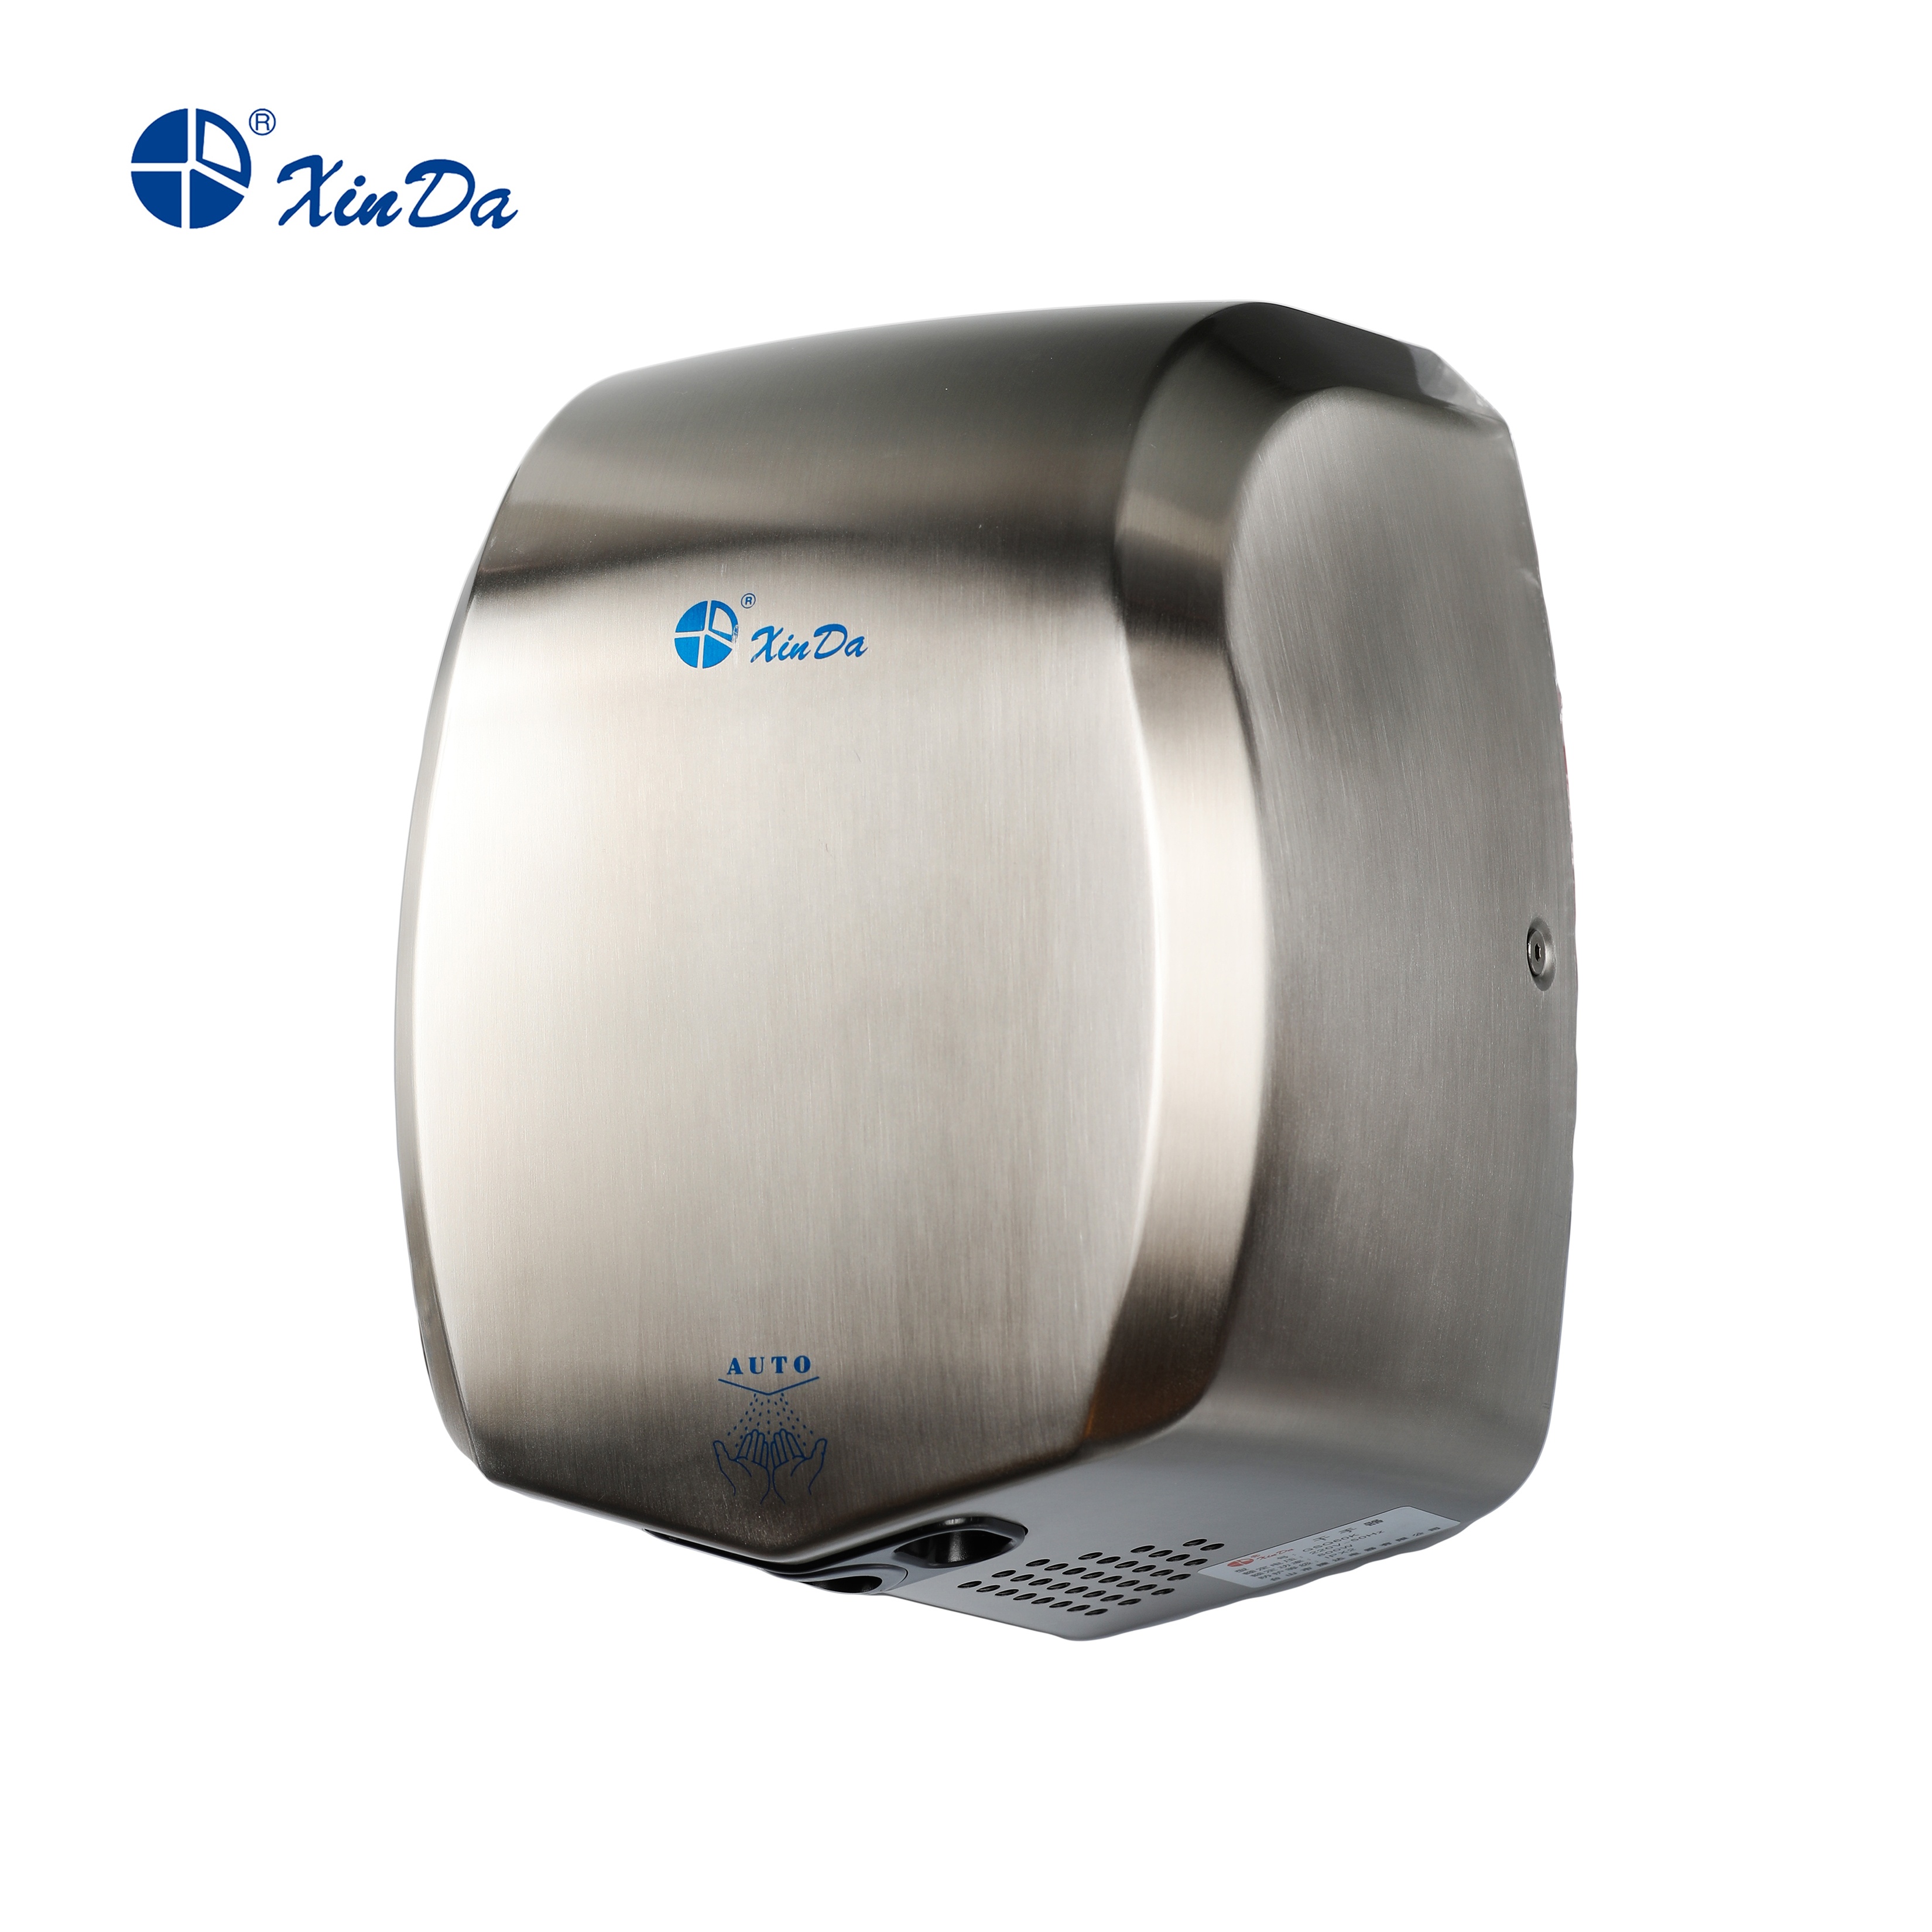 Stainless Steel Motor Automatic Infrared Sensor Wall Mounted Hand Dryer